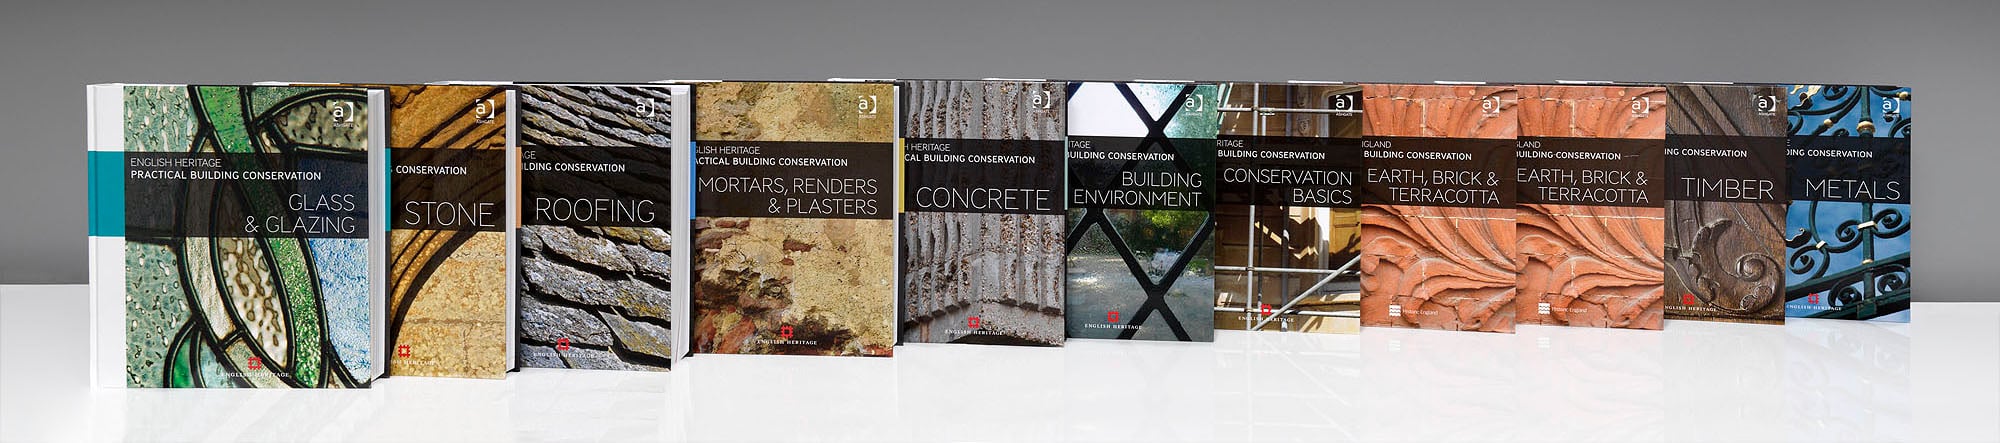 Image of the Practical Building Conservation series of books